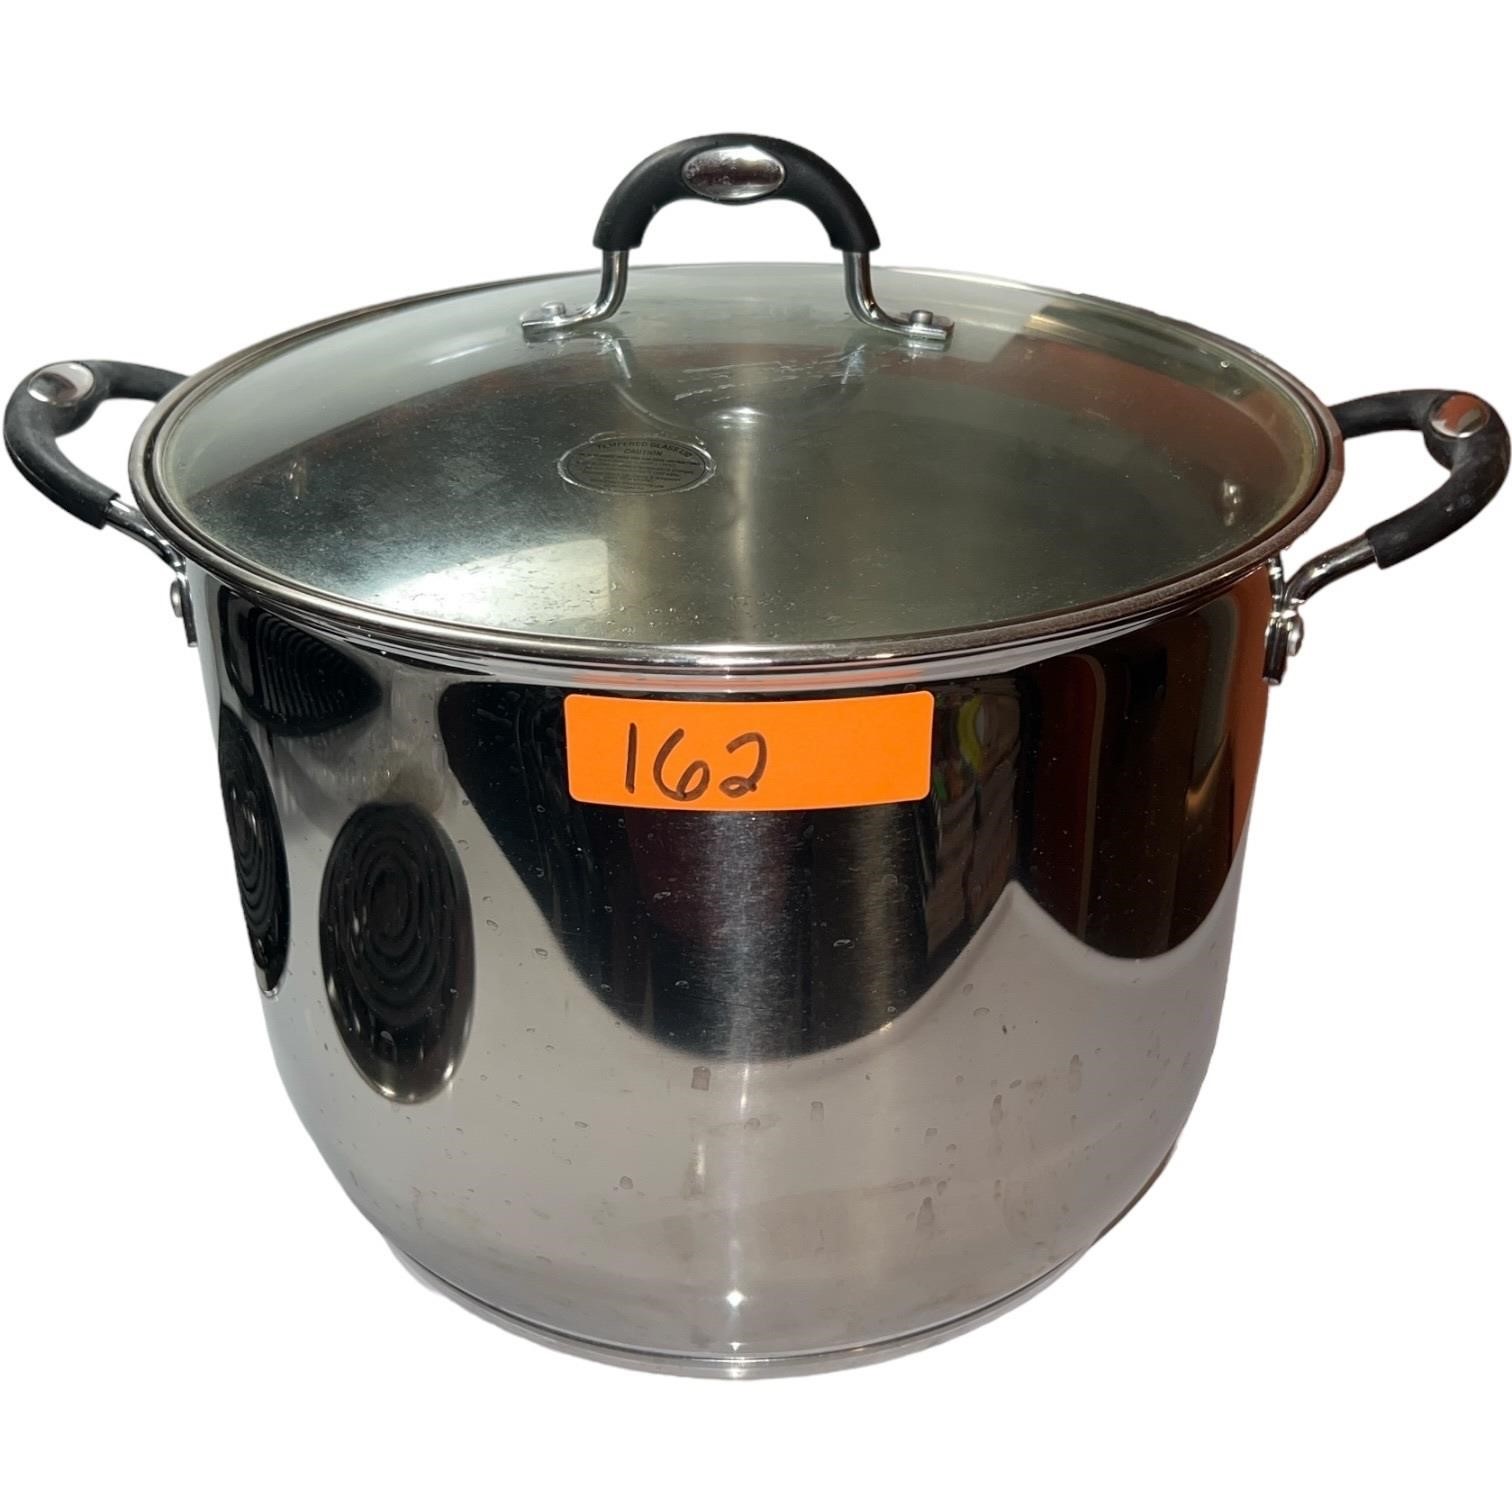 Tramontina Stainless Steel 16QT Tri-Ply Base